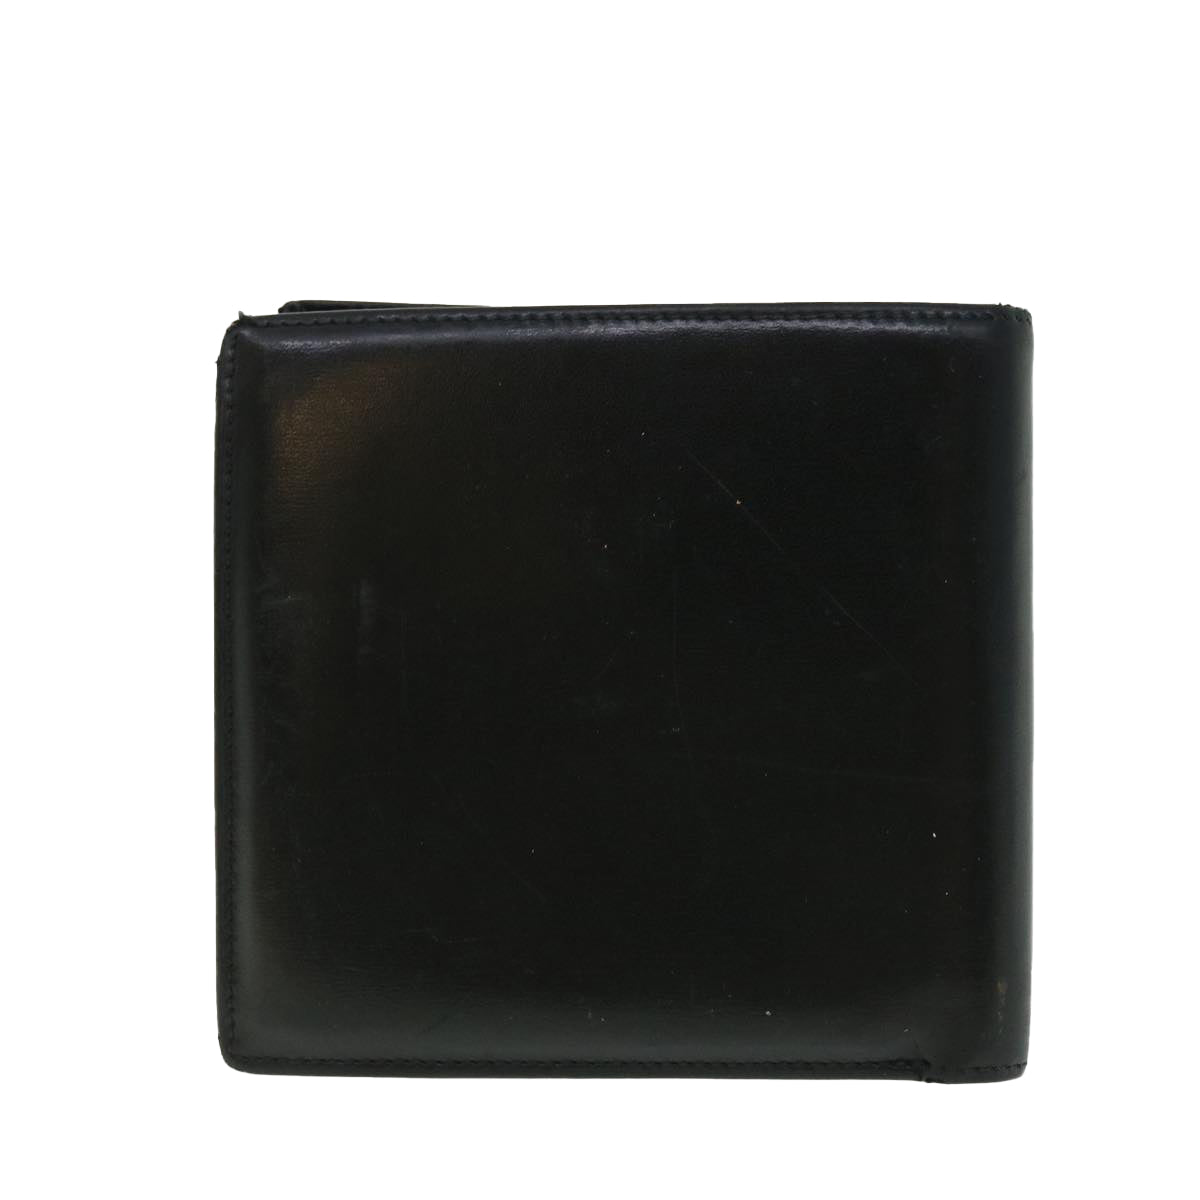 CARTIER Wallet Leather Black Auth 50851